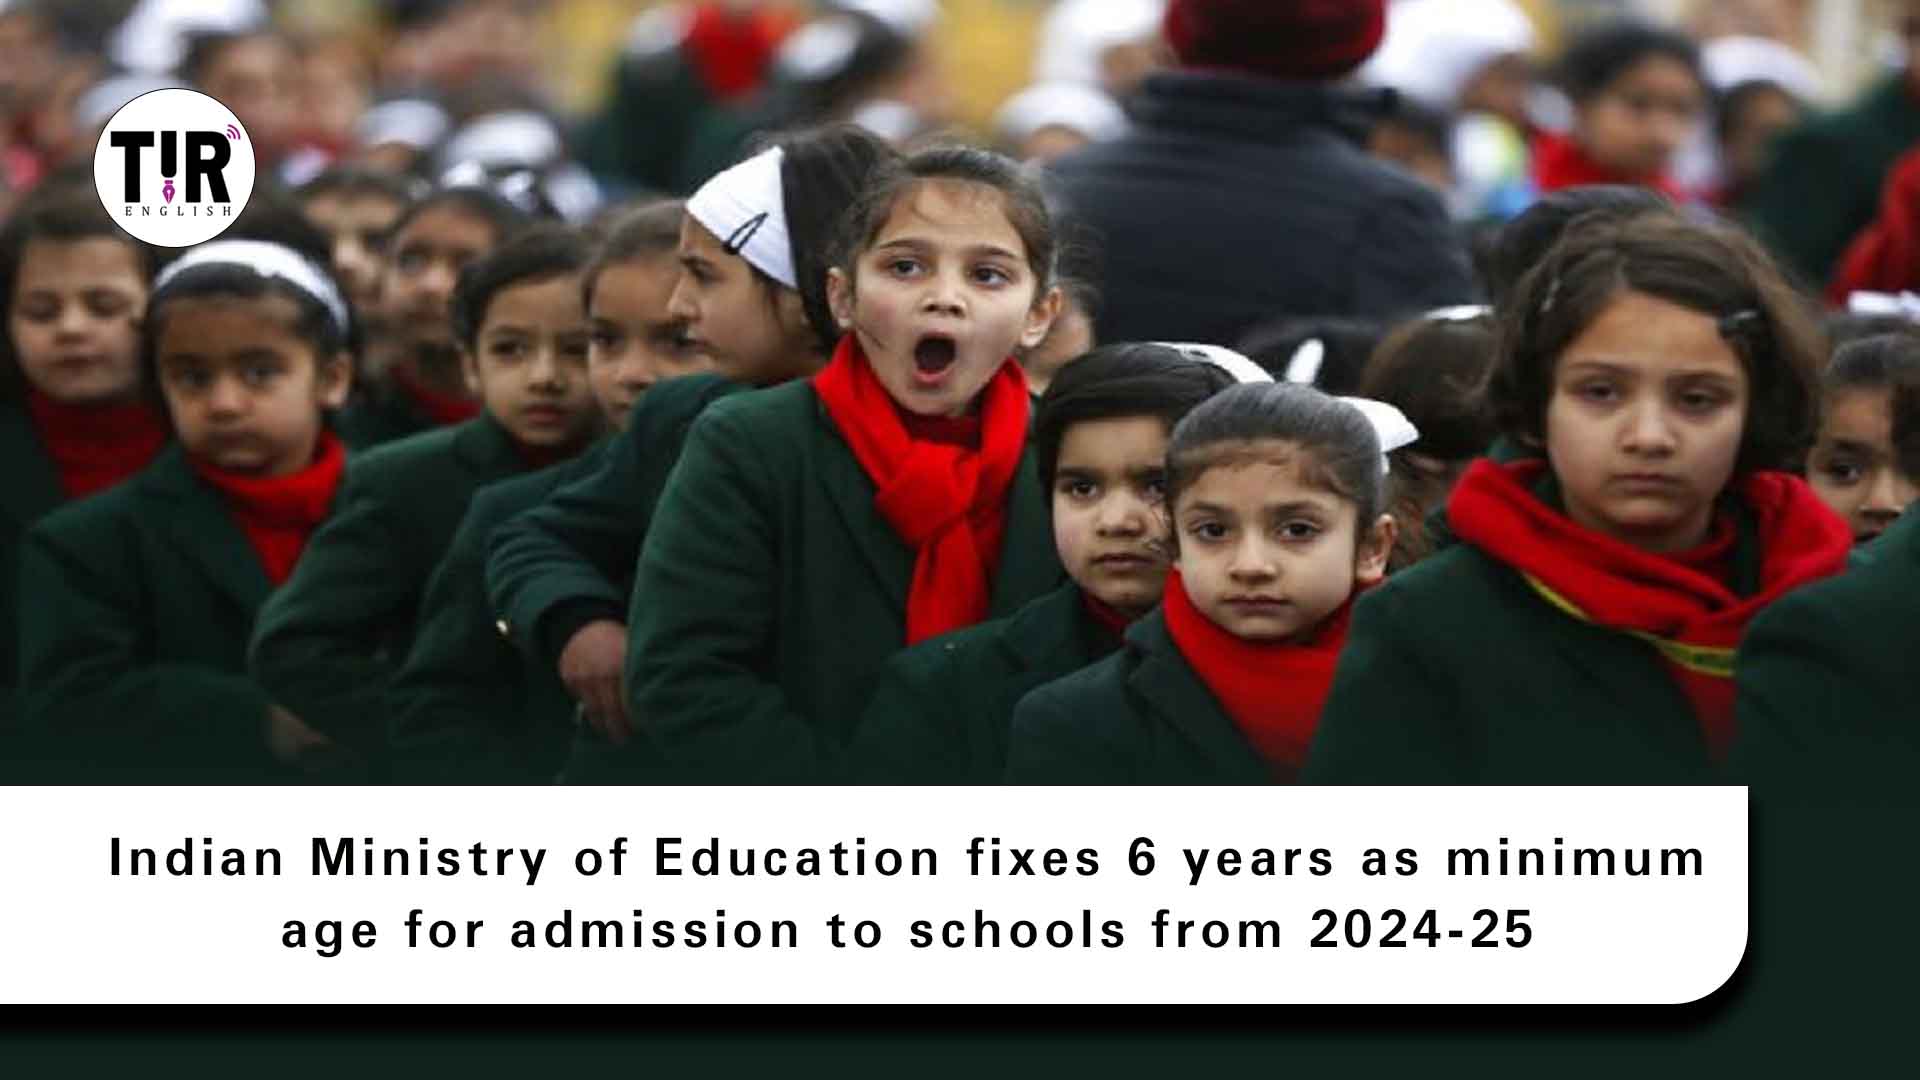 Indian Ministry of Education fixes 6 years as minimum age for admission to schools from 2024-25